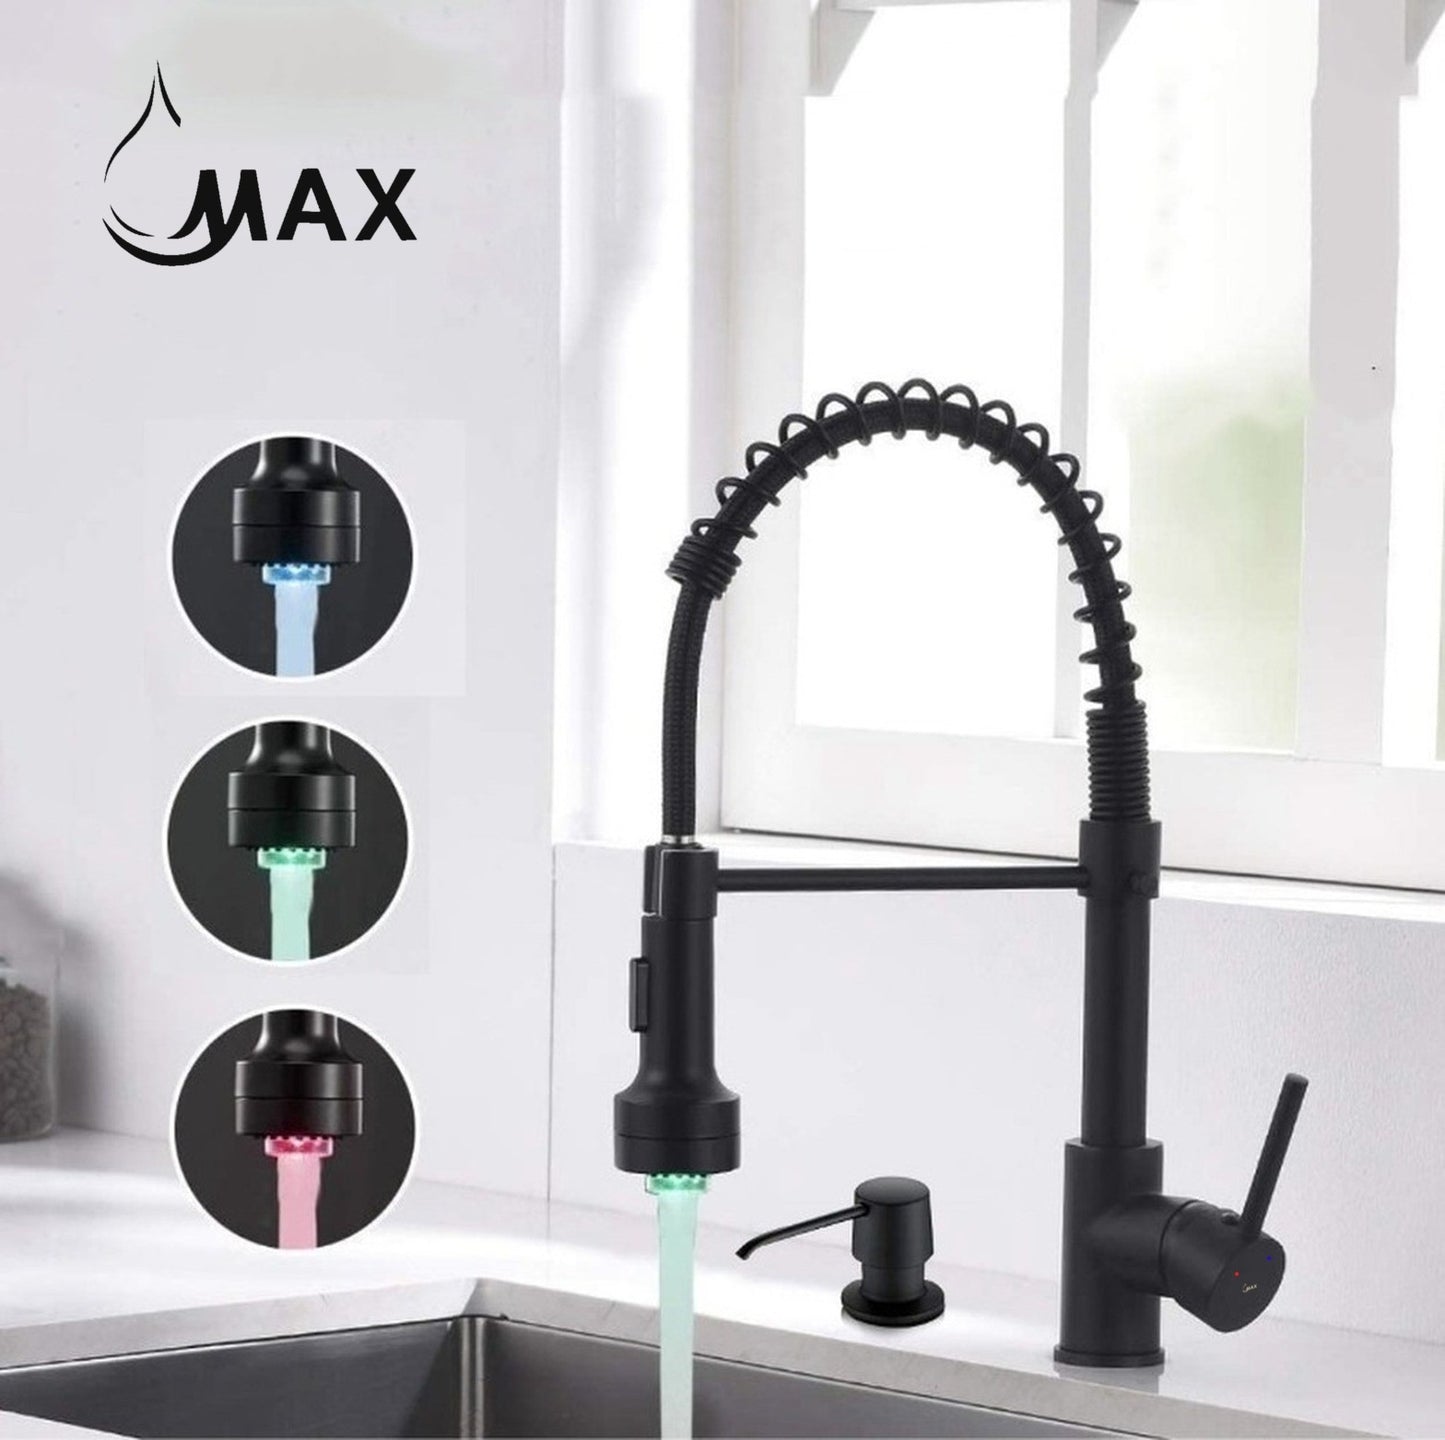 Pull-Down Spiral Kitchen Faucet Chef Style 16.5" With LED Light And Soap Dispenser Matte Black Finish.